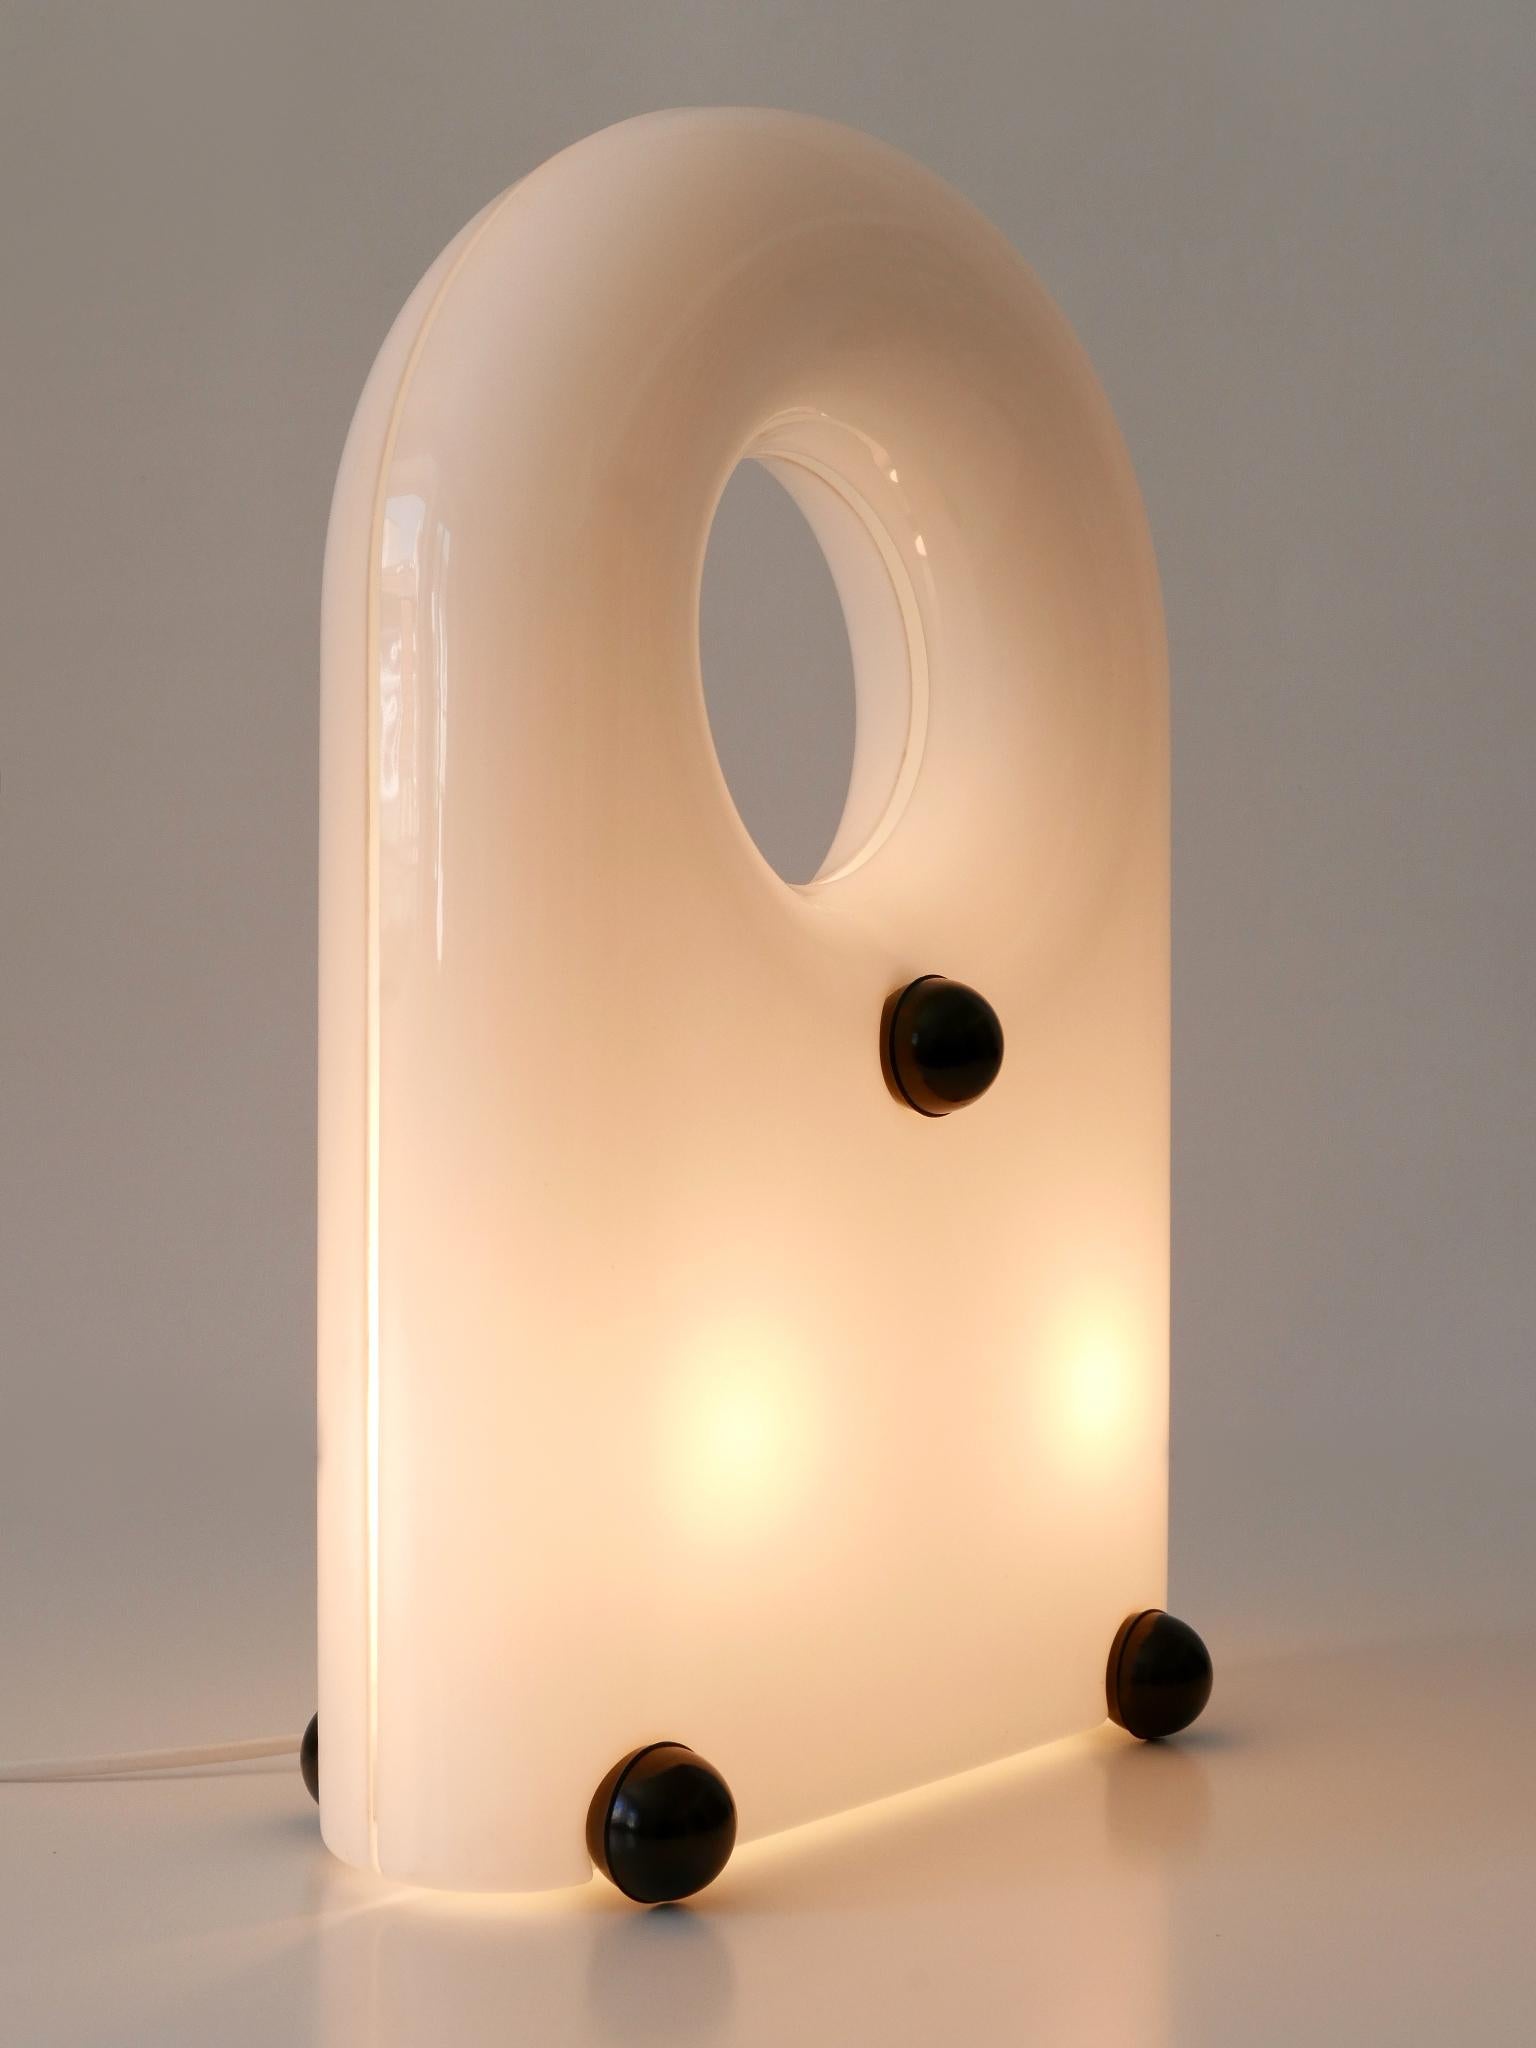 Extremely rare and elegant Mid-Century Modern table lamp or floor light. 
Designed by Elio Martinelli, 1969 for Martinelli Luce, Italy.

Executed in white lucite and black plastic, the lamp is executed with 2 x E14 / E12 Edison screw fit bulb